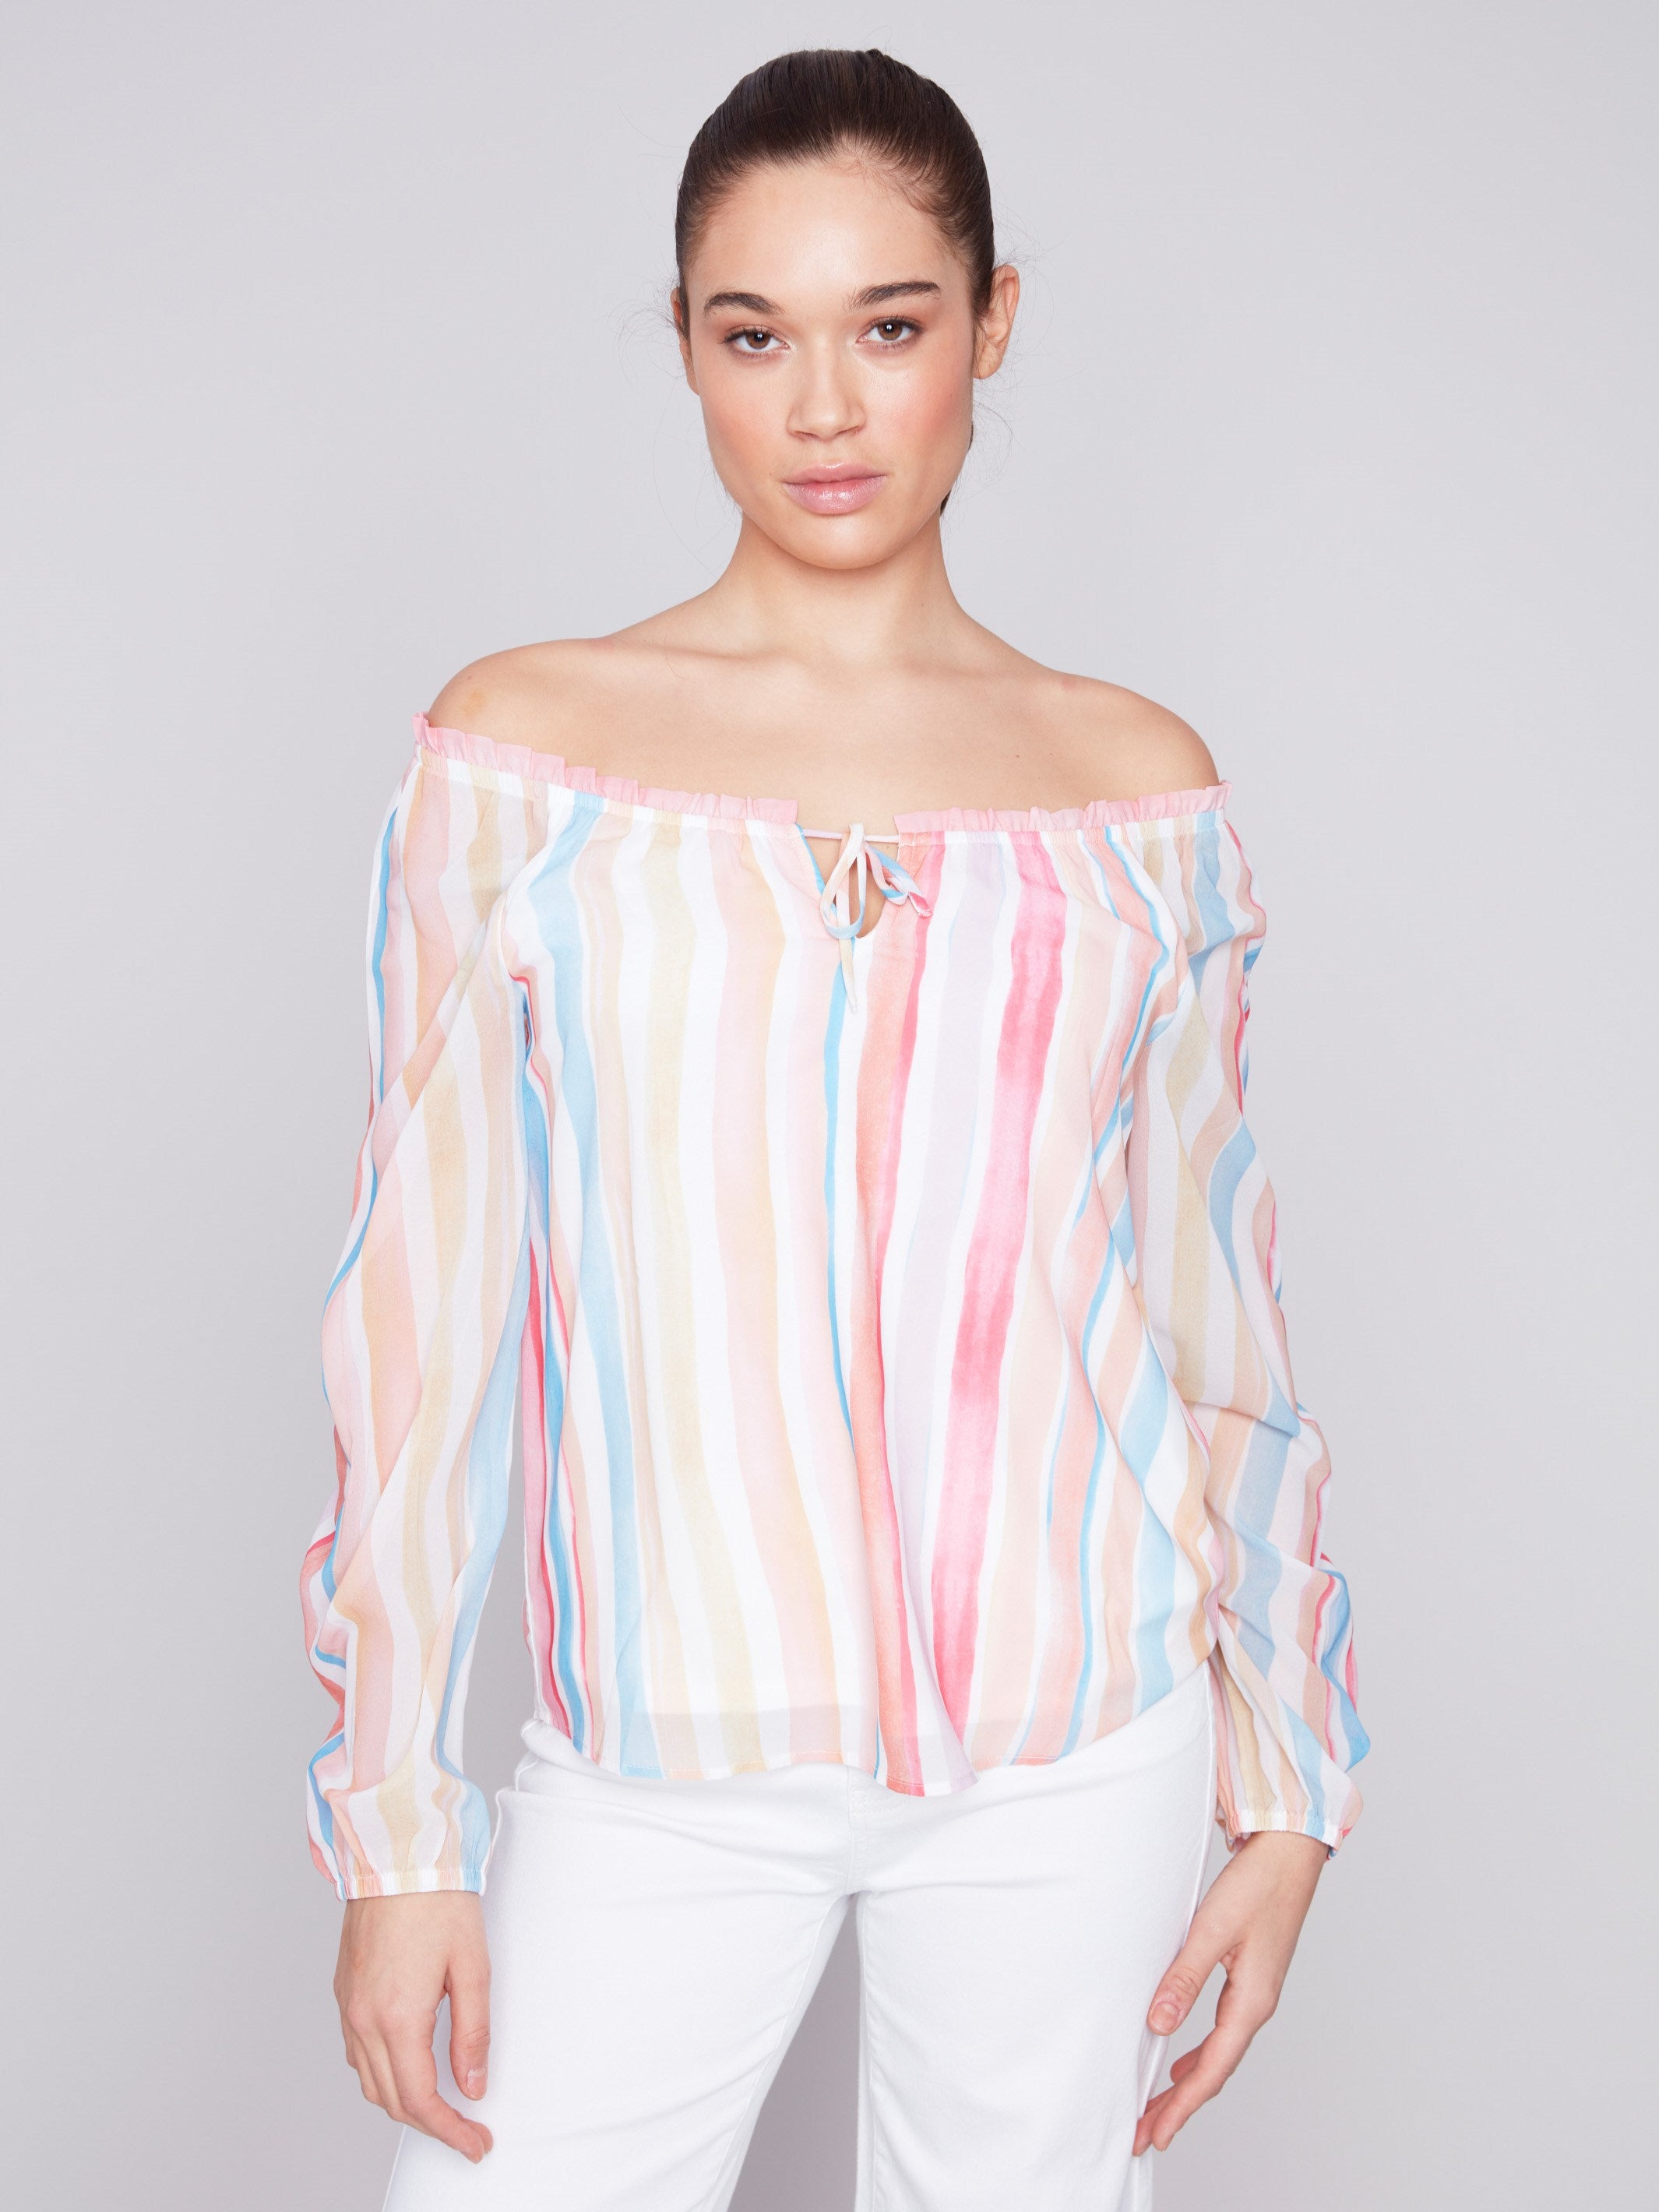 Printed Chiffon Blouse - Stripes - Charlie B Collection Canada - Image 1